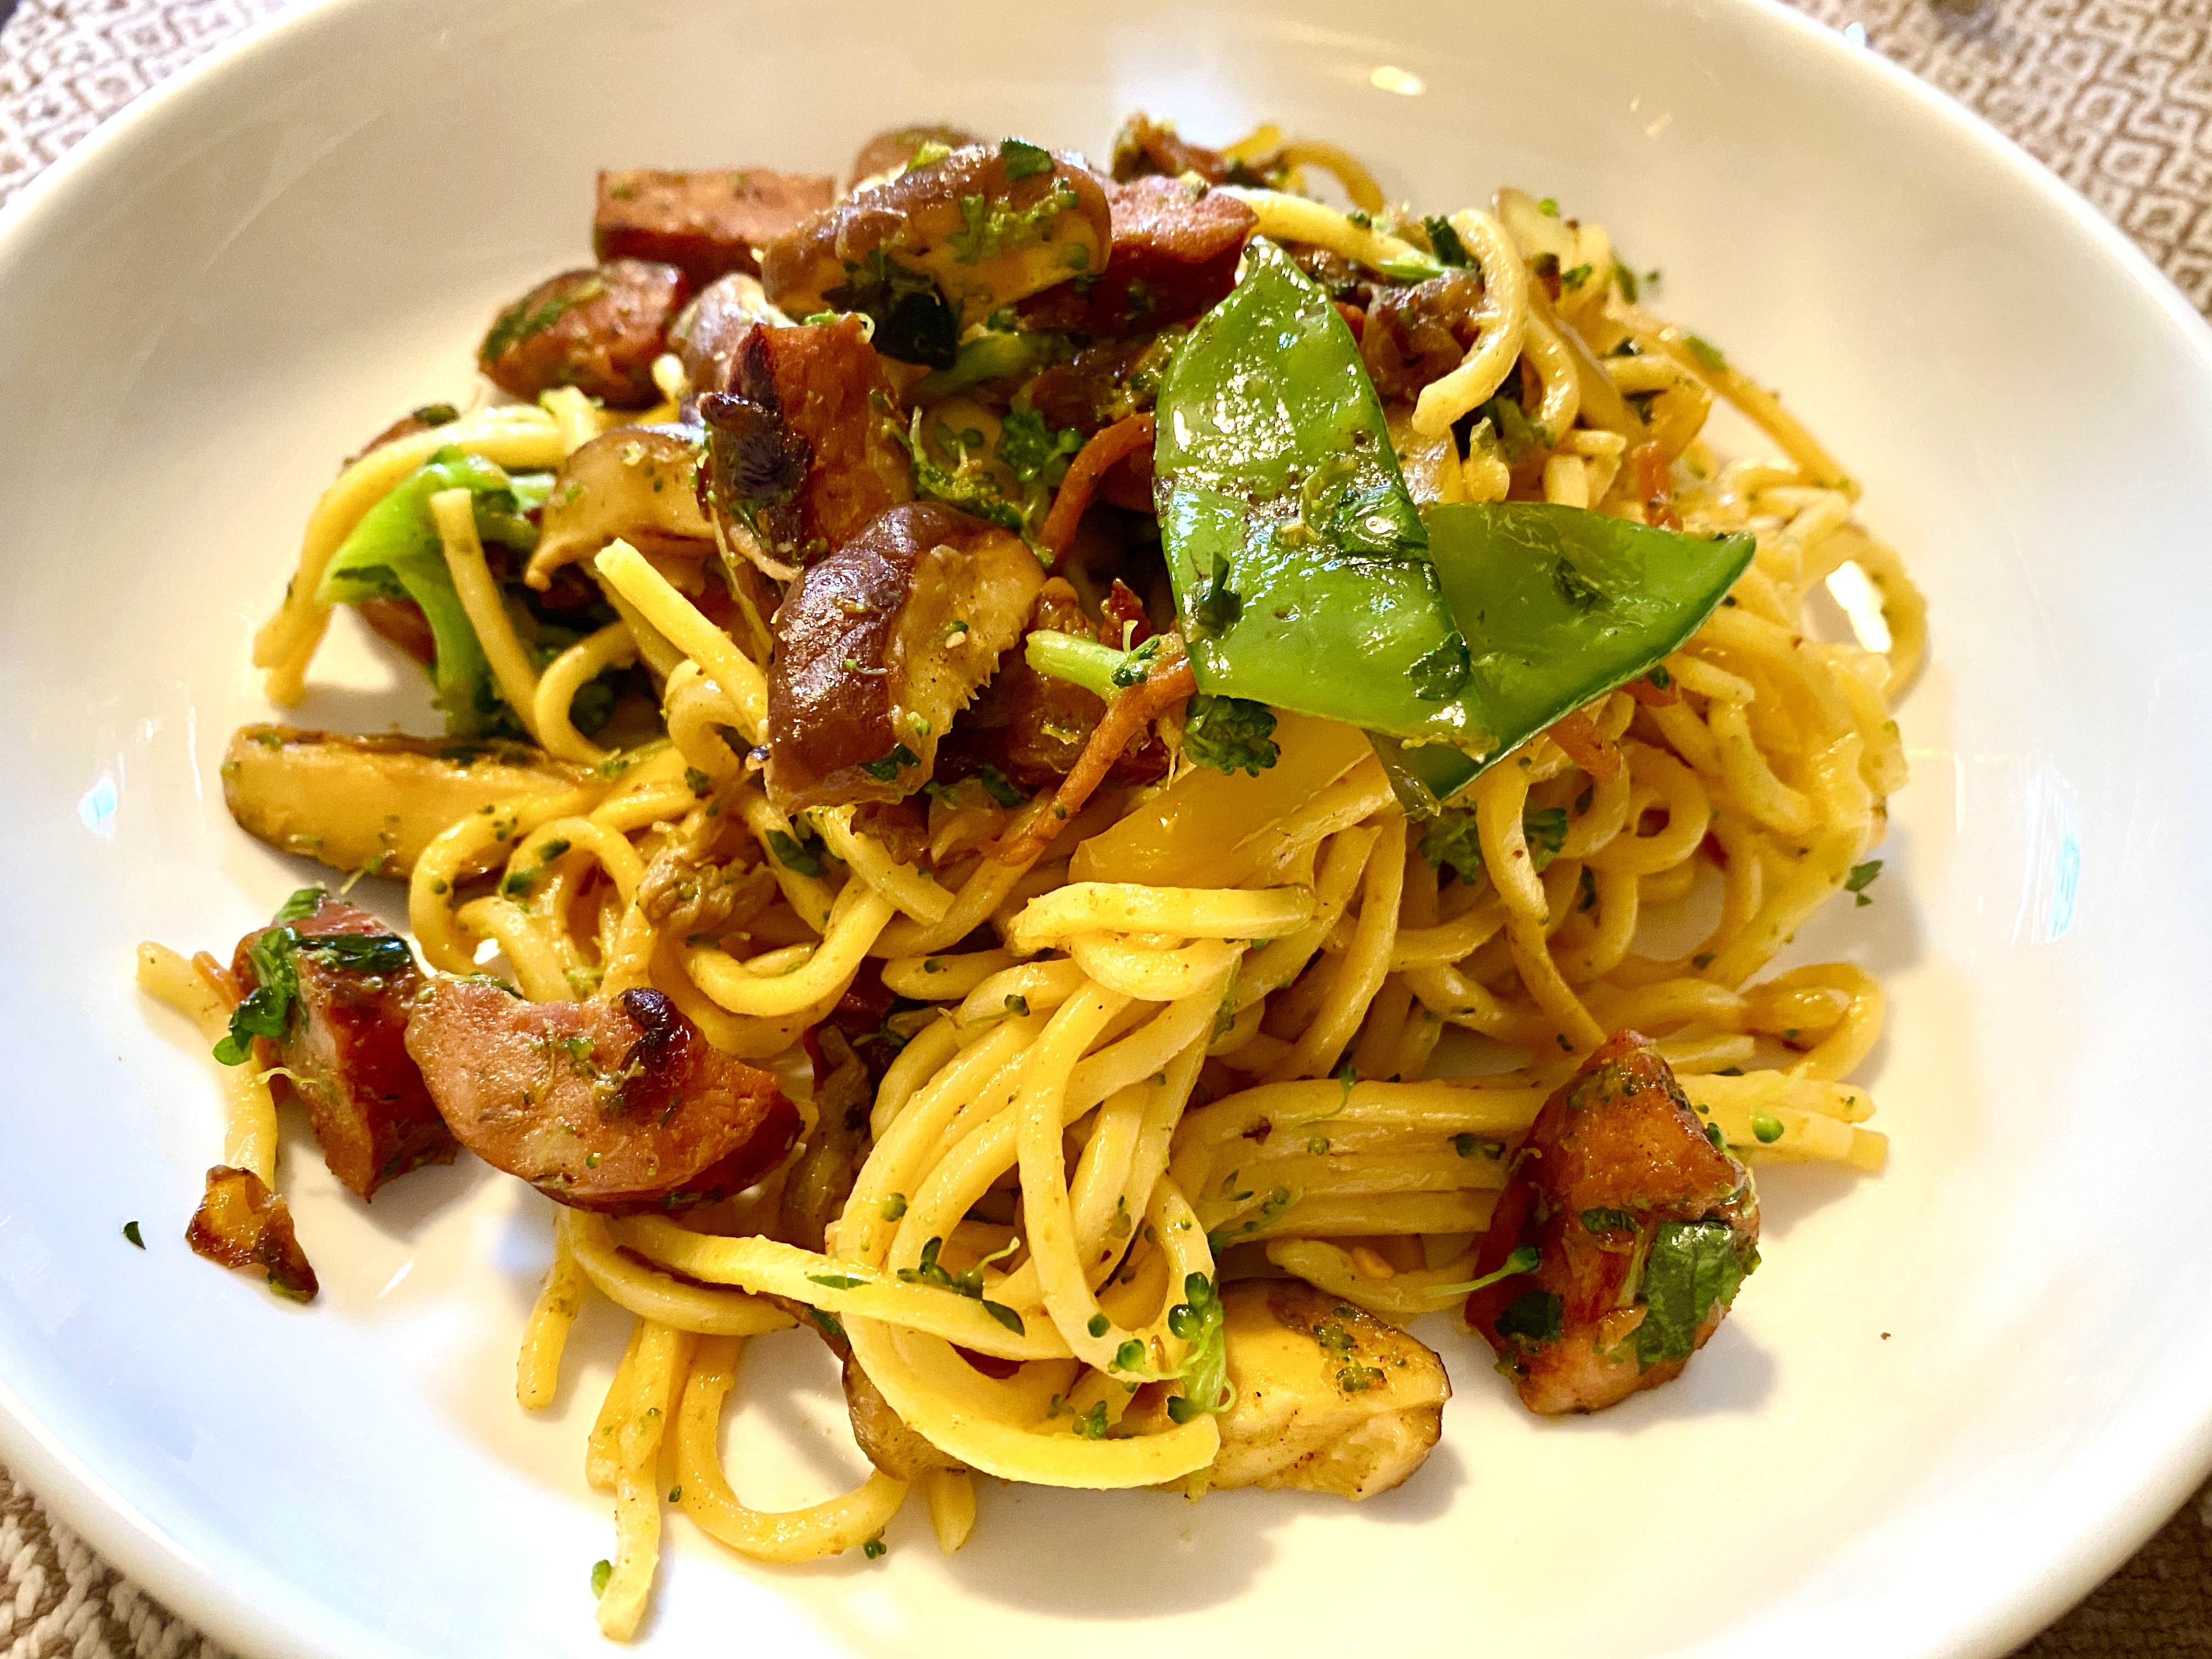 Curried noodle stir fry with spicy sausage